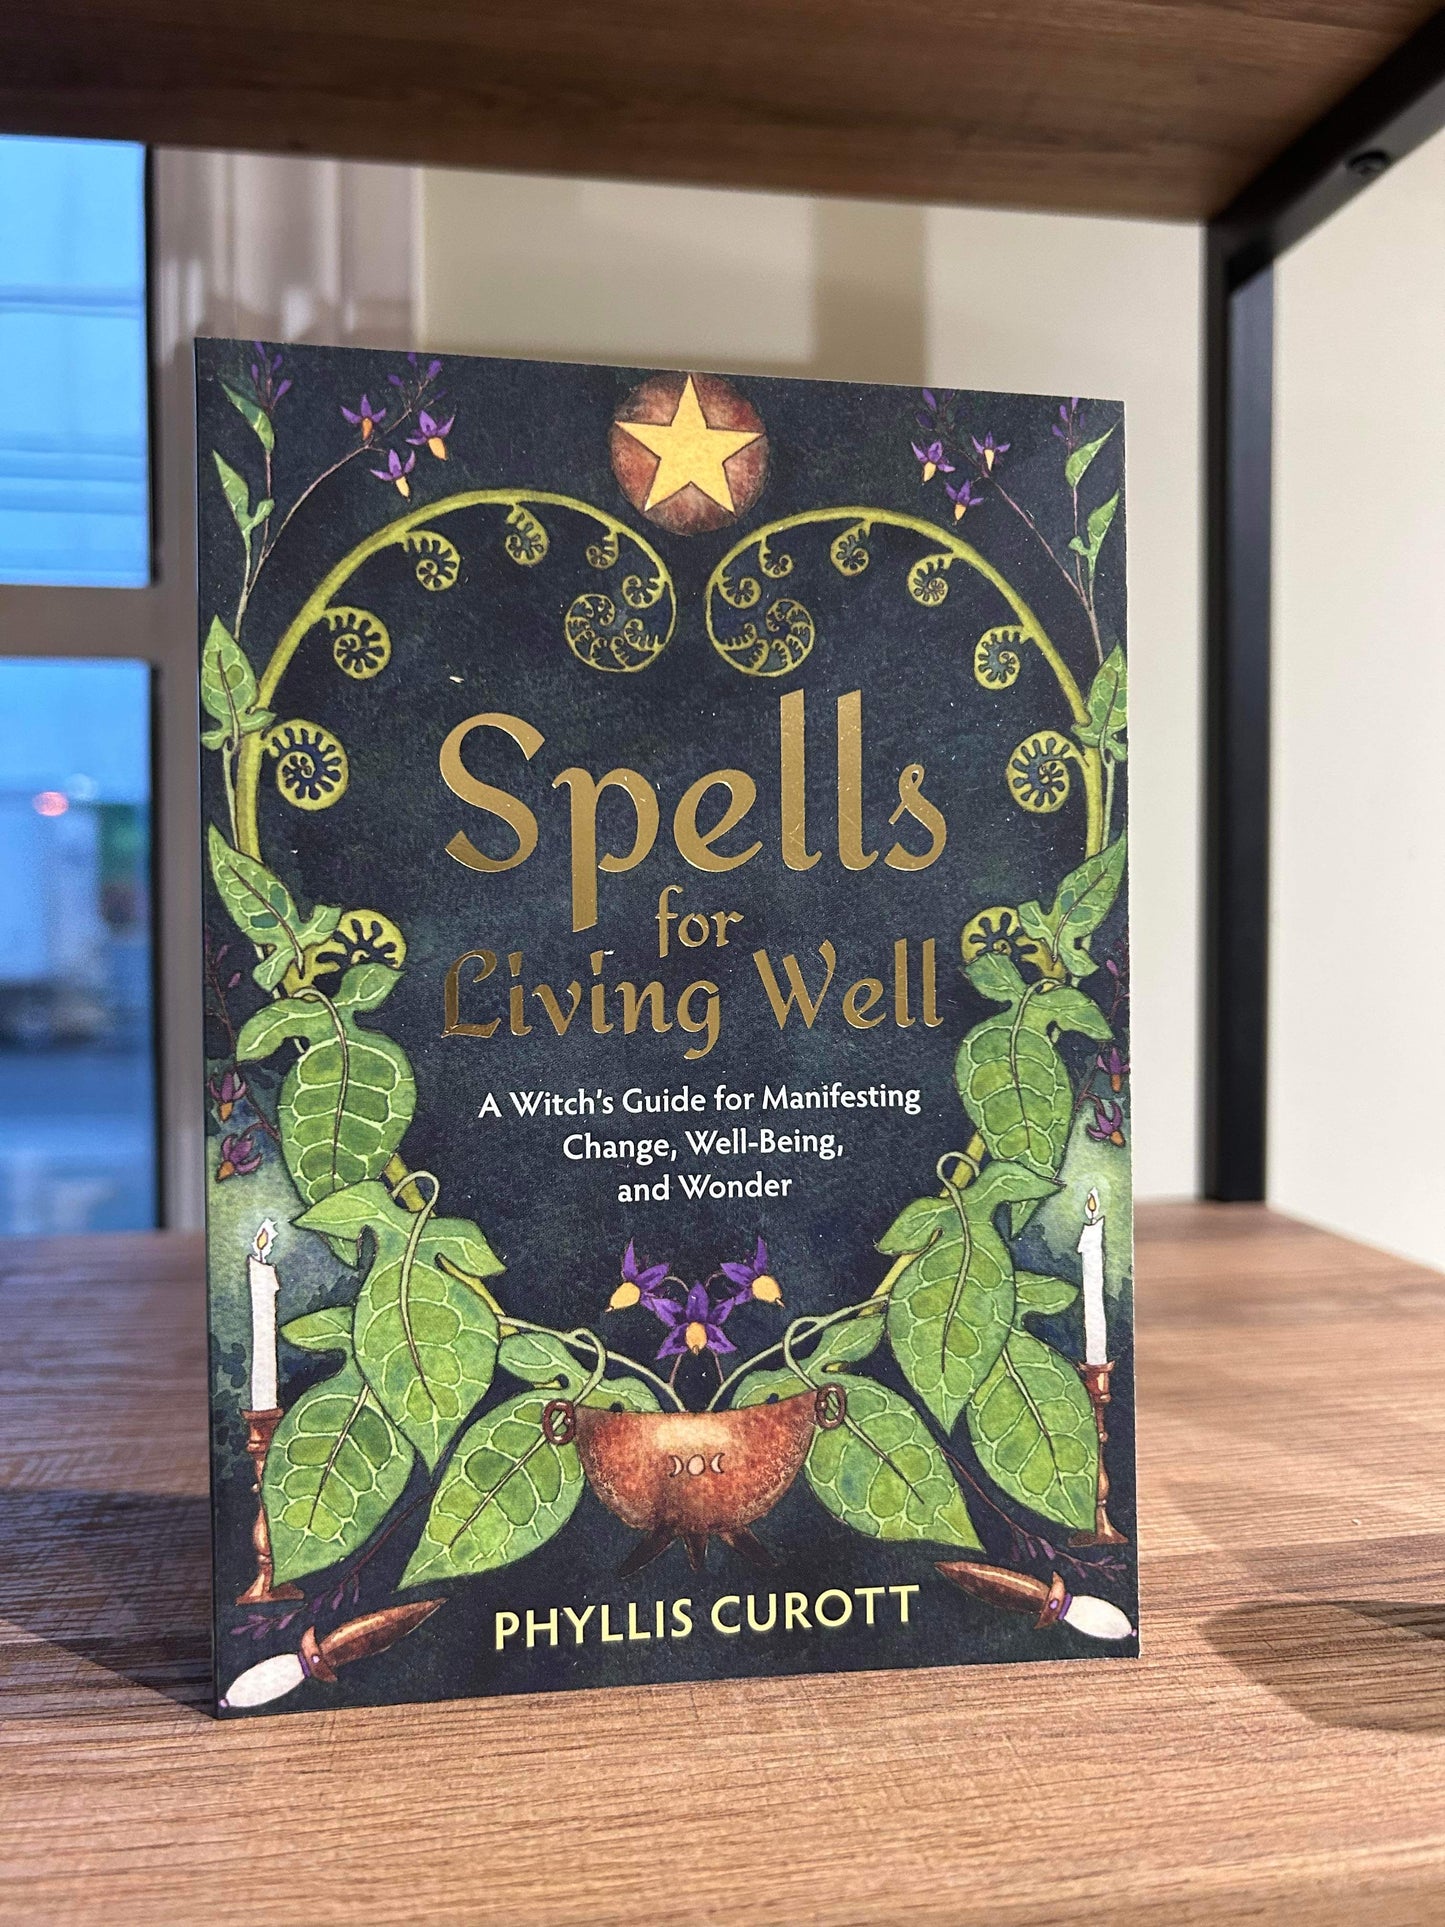 Spells for Living Well by Phyllis Curott